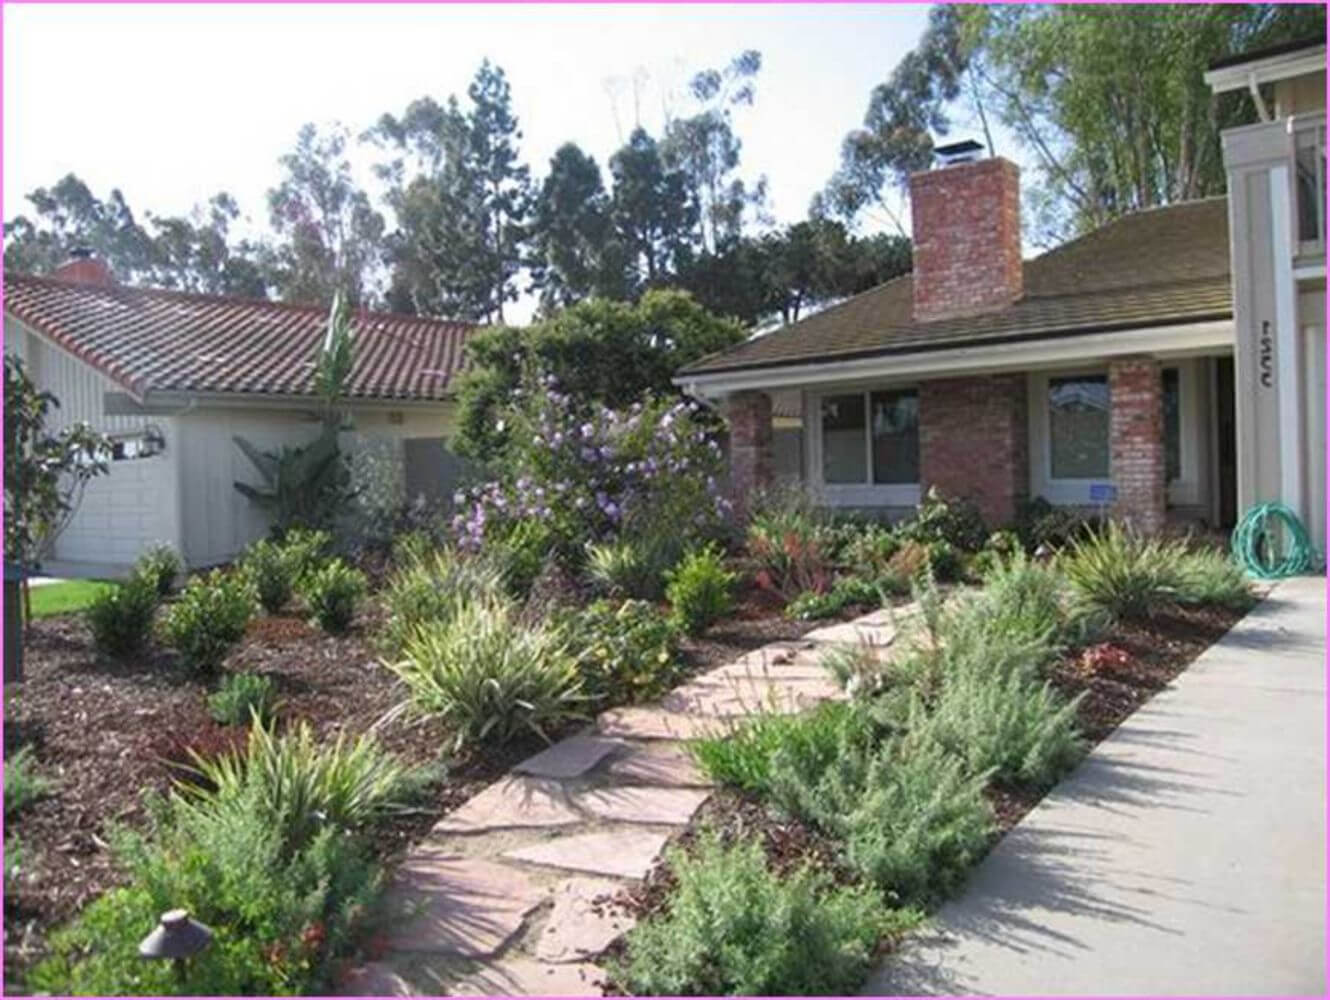 Landscaping Design Ideas Without Grass, How To Landscape A Small Front Yard Without Grass